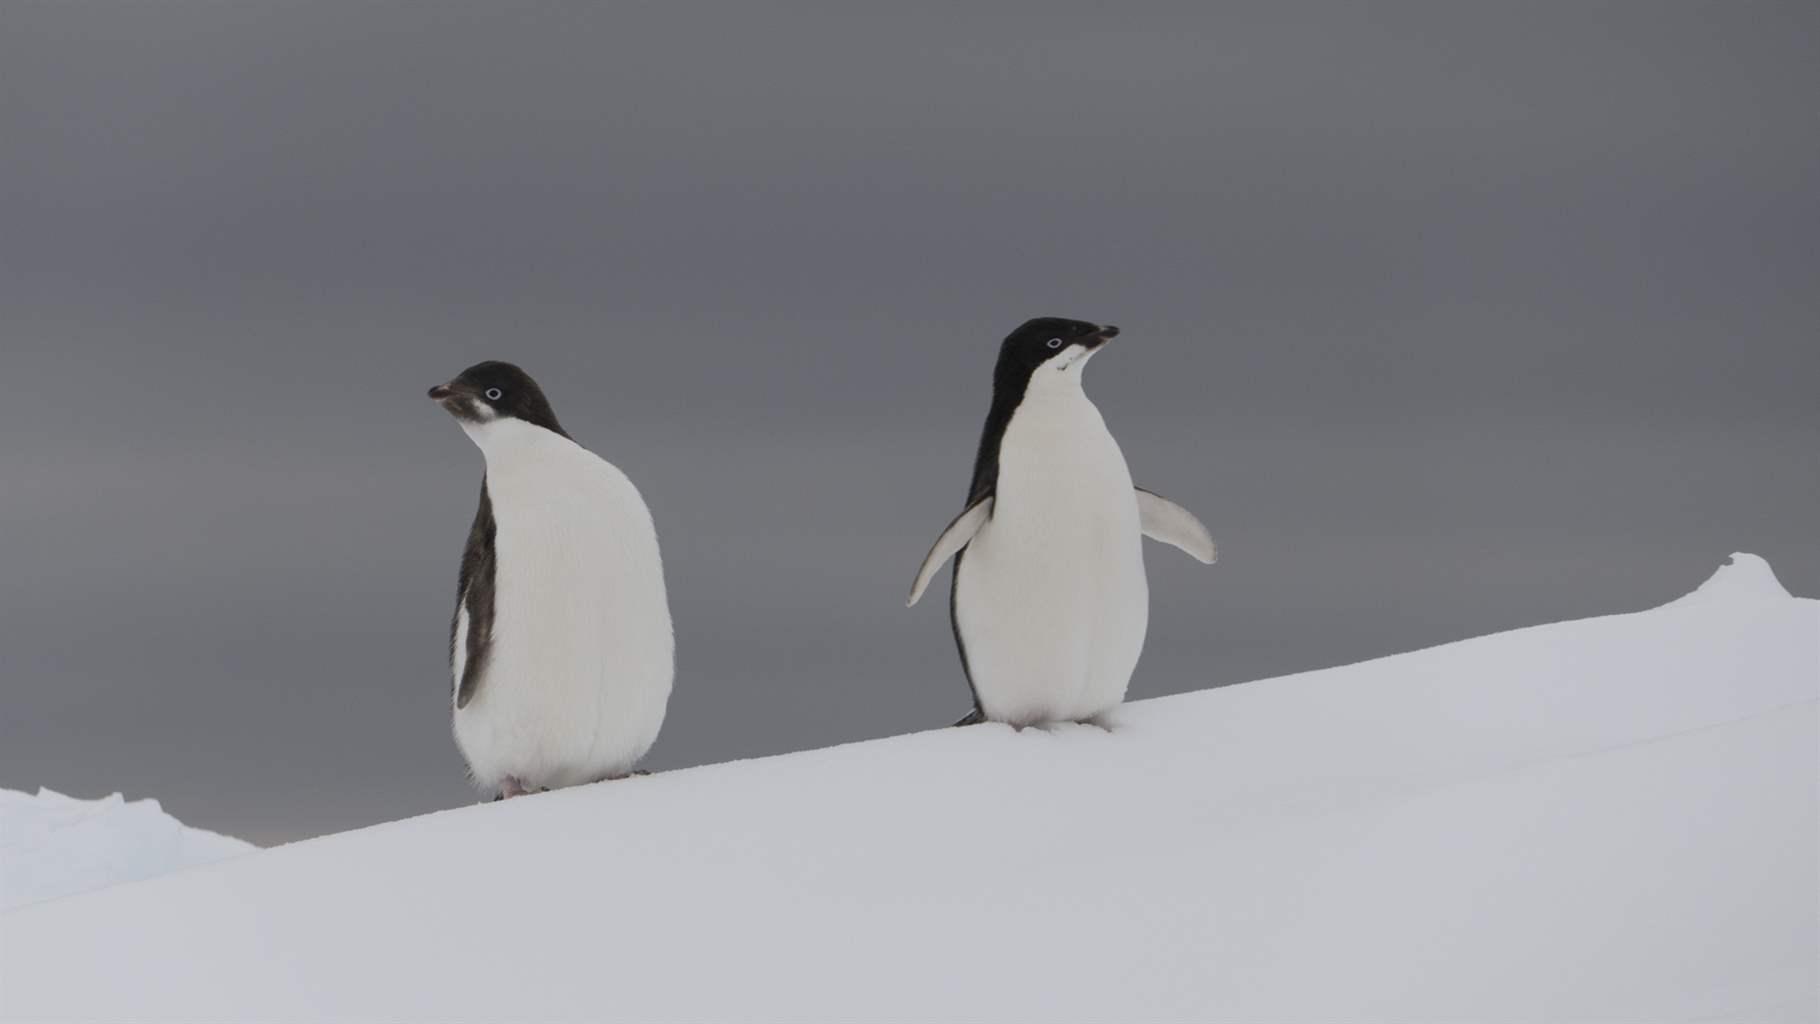 Two black-and-white penguins stand on snow next to each other.